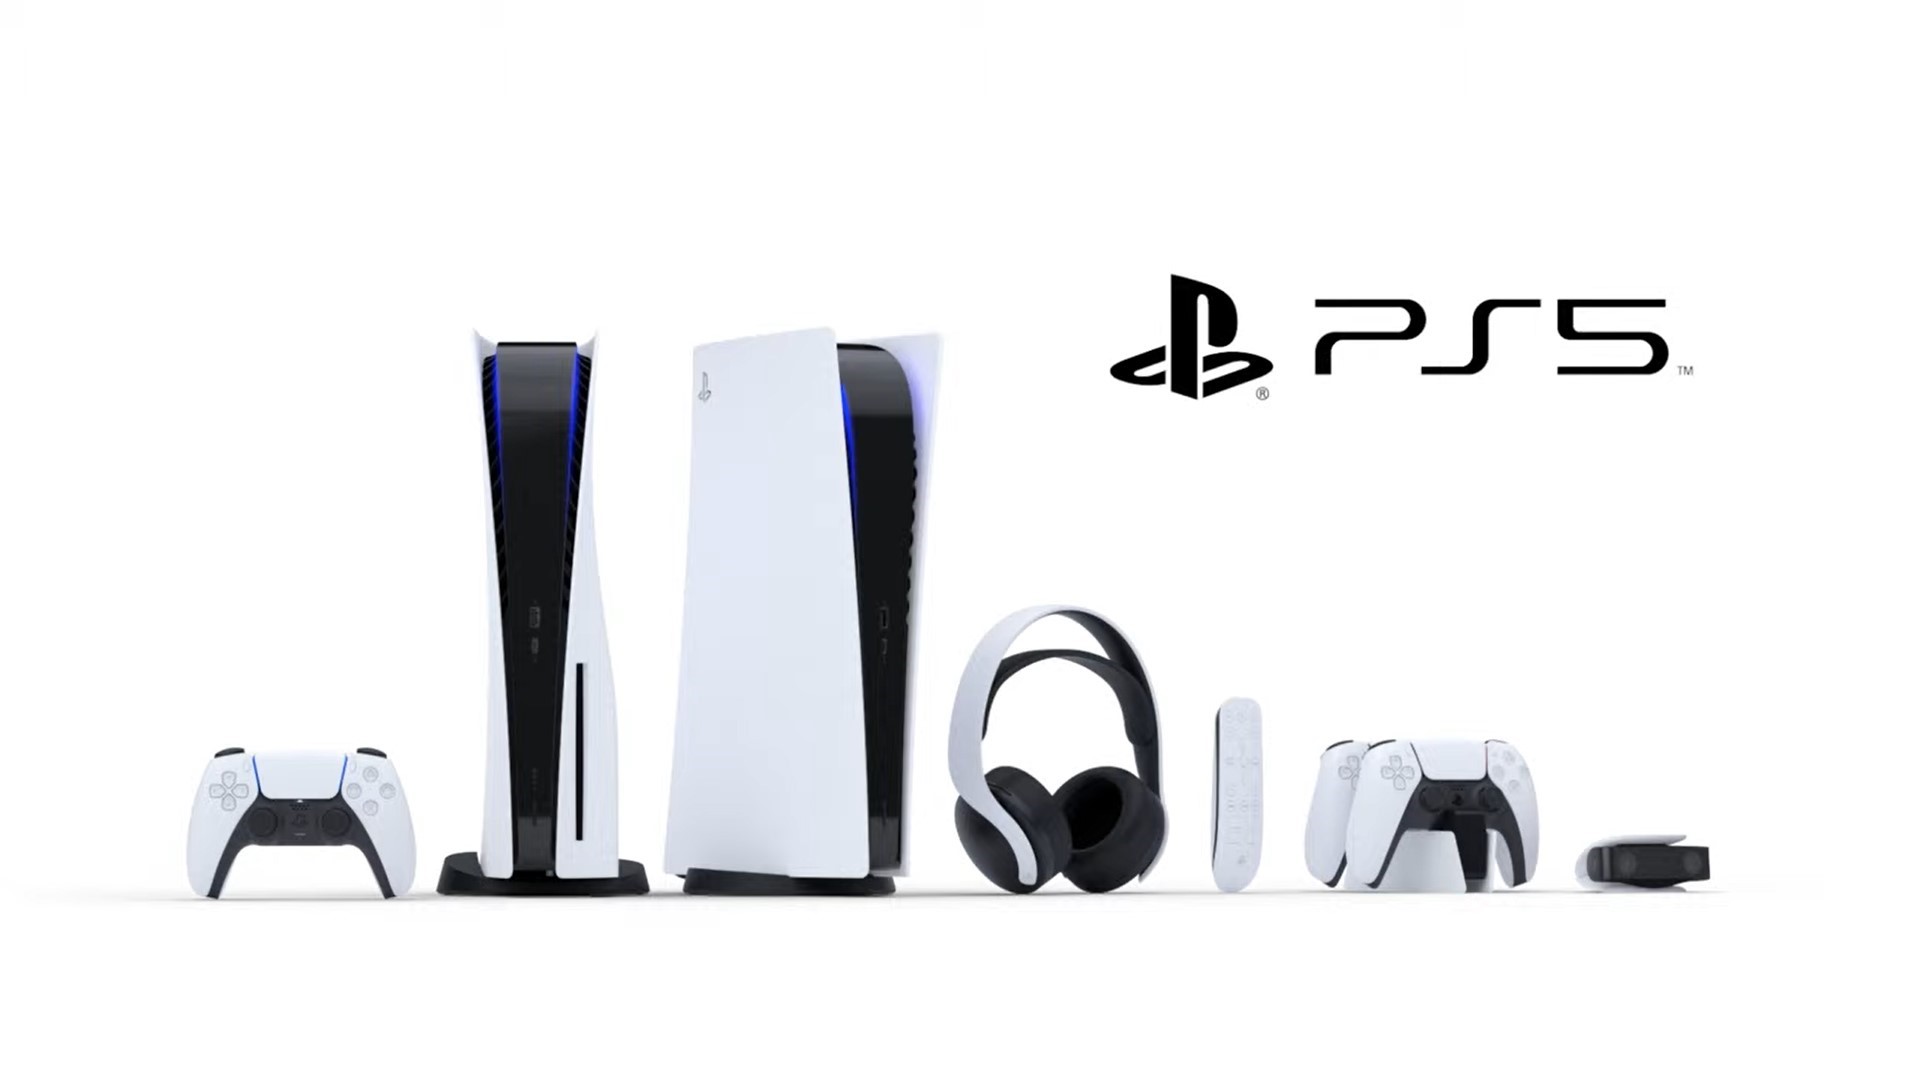 PS5 vs PS4 Pro: The PS5 family of consoles and accessories